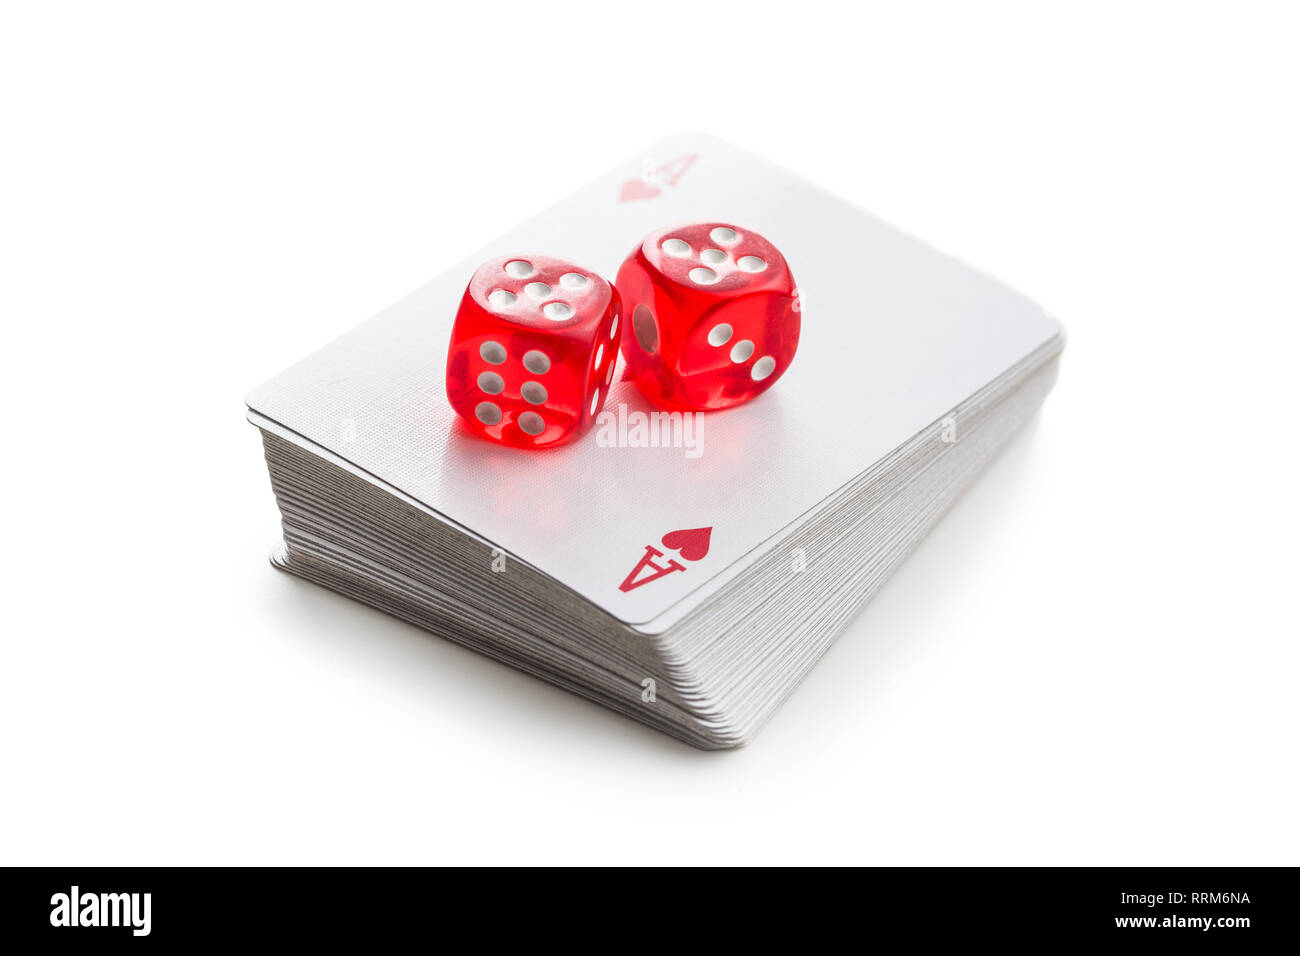 Dice and poker cards isolated on white background. Stock Photo